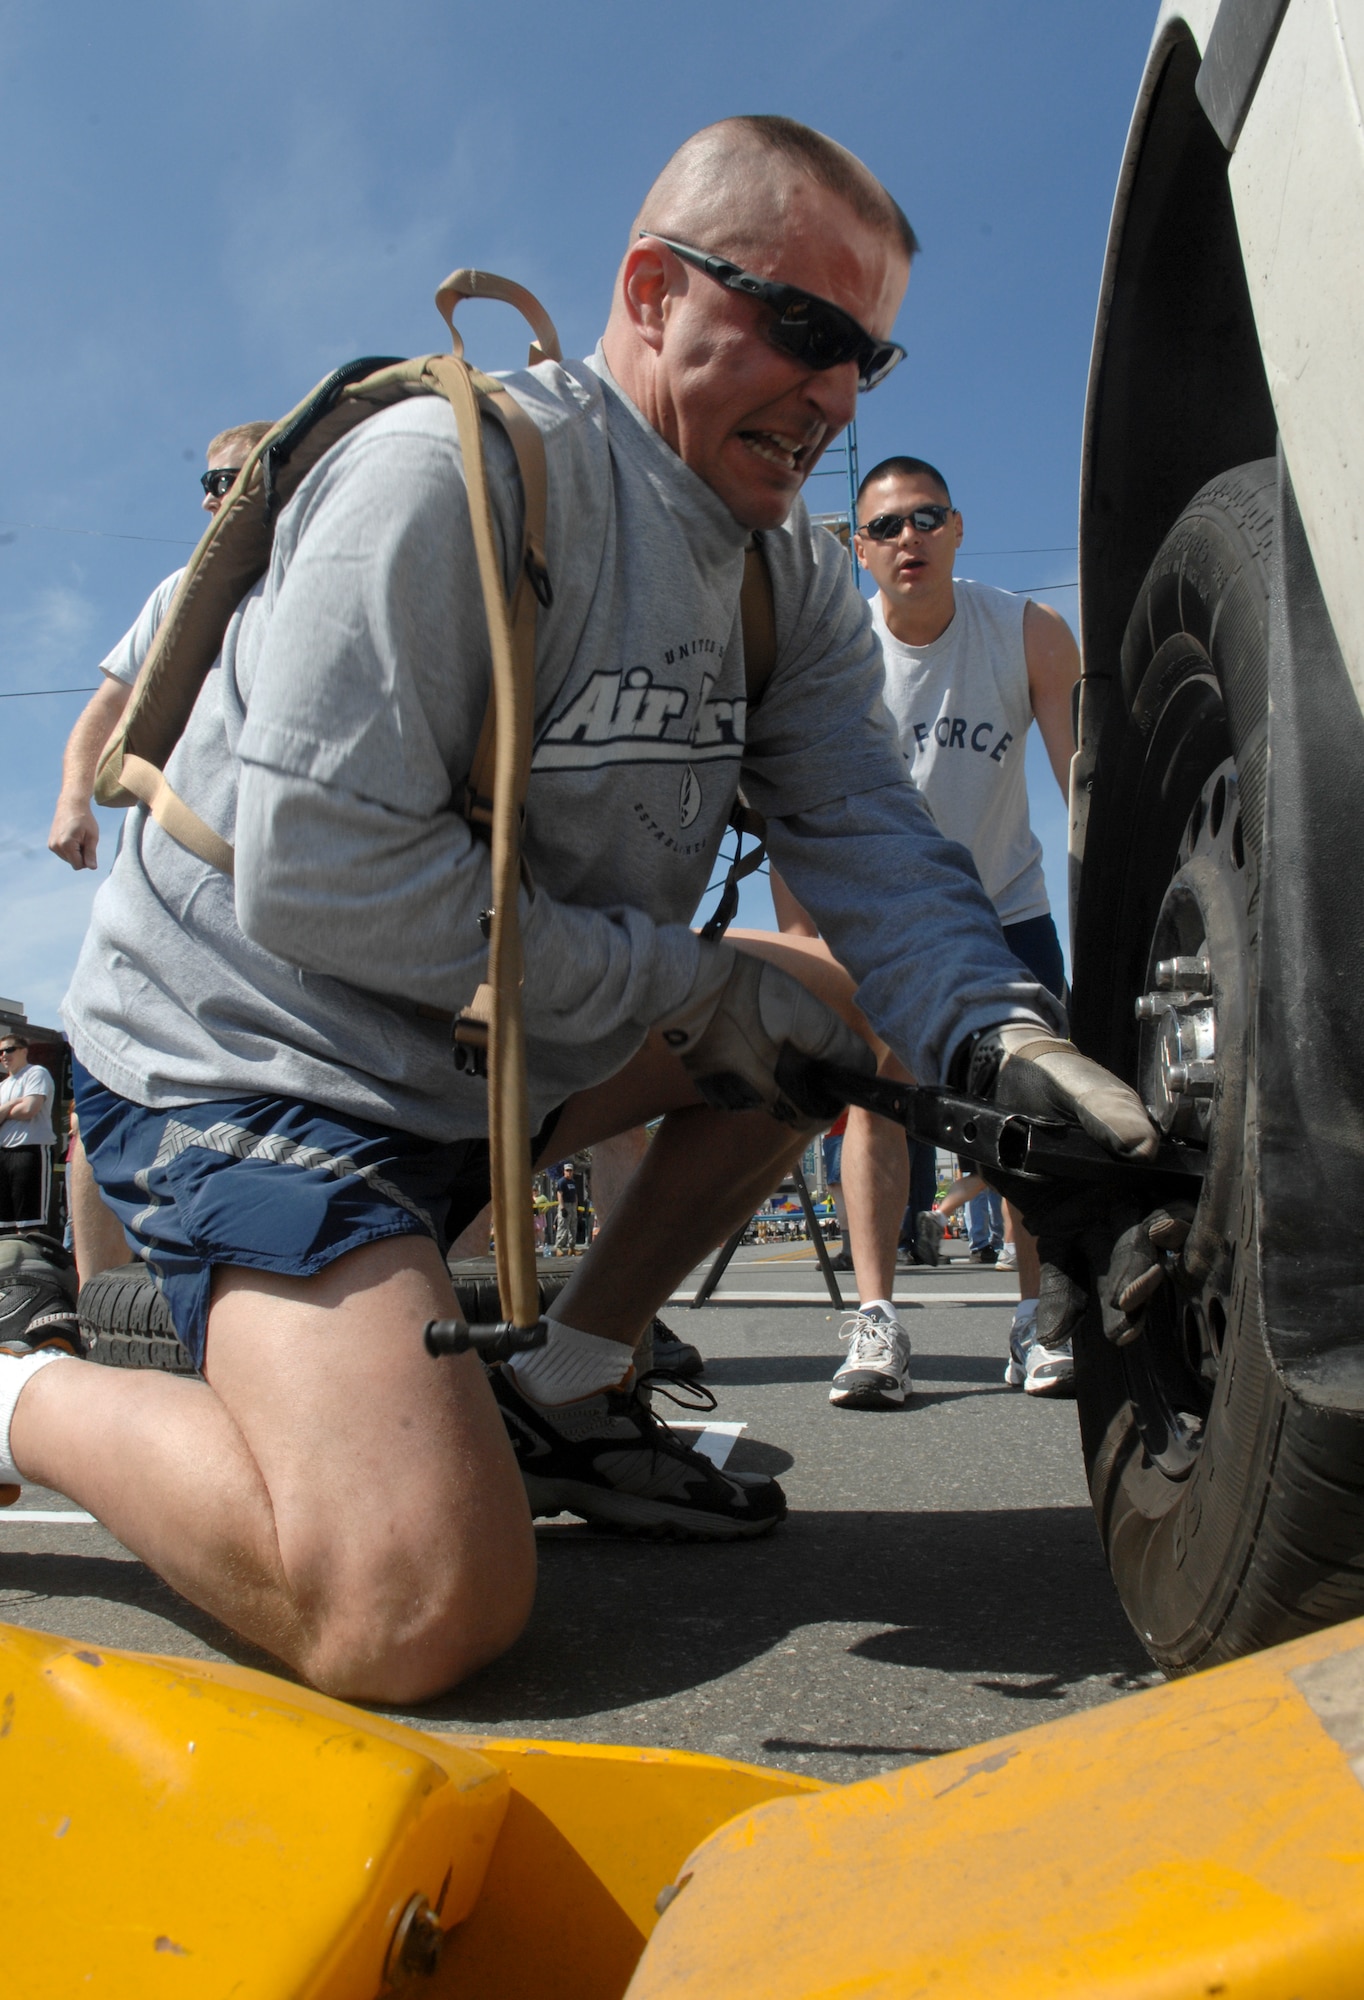 ANCHORAGE, Alaska -- Master Sgt. Chris Schott tightens up the lug nuts on a tire of an Anchorage Police Department cruiser during the 2009 Hero Games June 27. Hero Games brought military and civilian teams together in a friendly competition of various games such as water balloon volleyball, tug o' war and litter carry. Schott is a member of the 3rd Civil Engineer Squadron. (U.S. Air Force photo/Senior Airman David Carbajal)